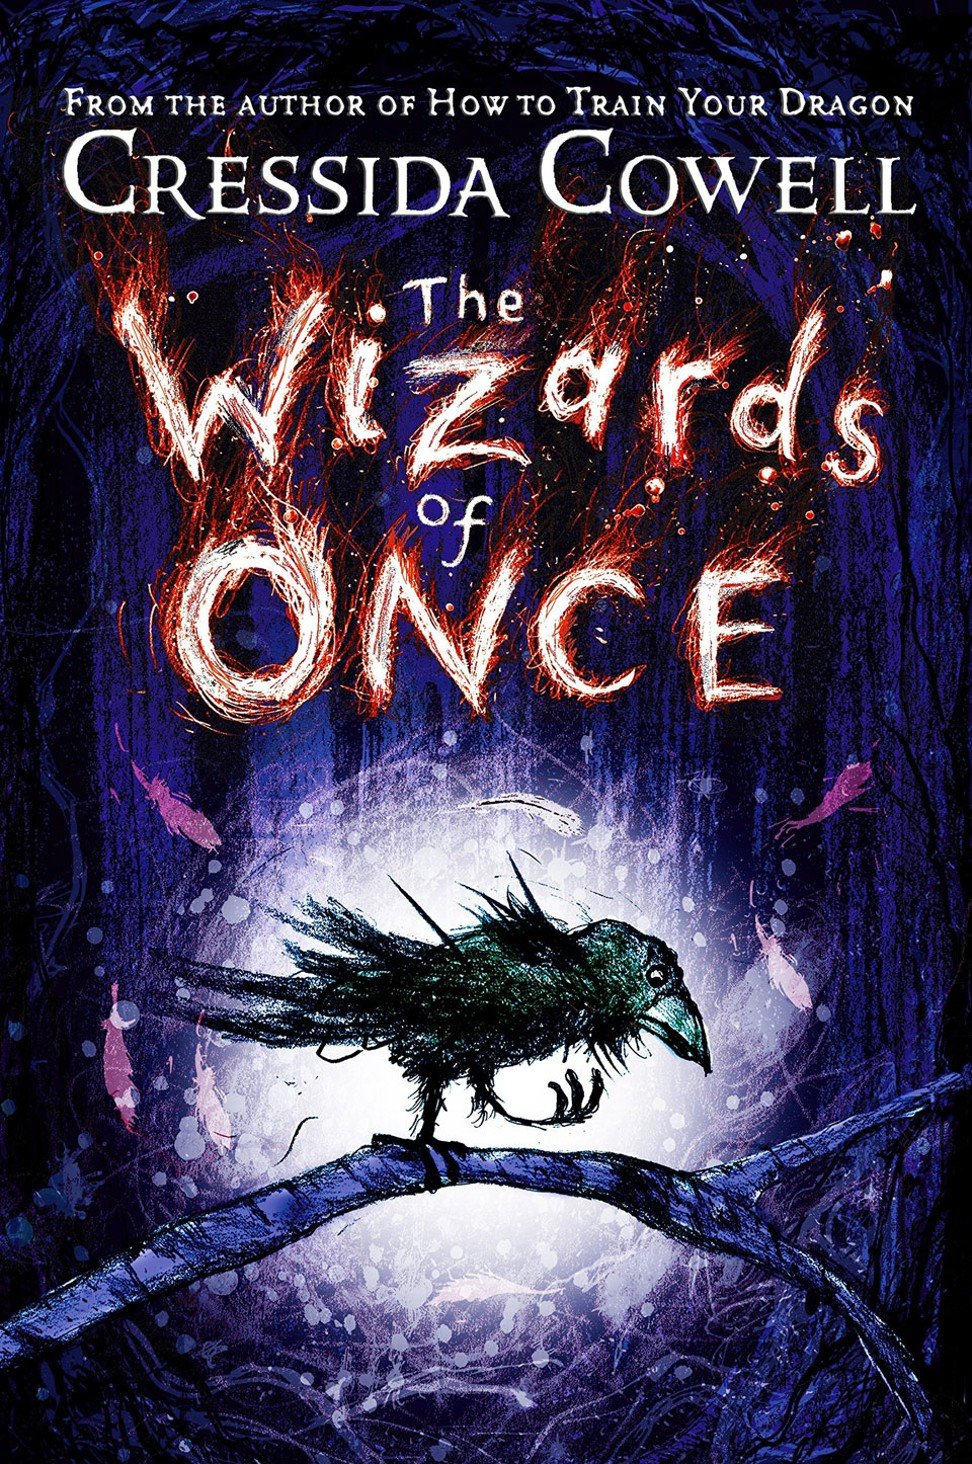 The Wizards of Once by Cressida Cowell.